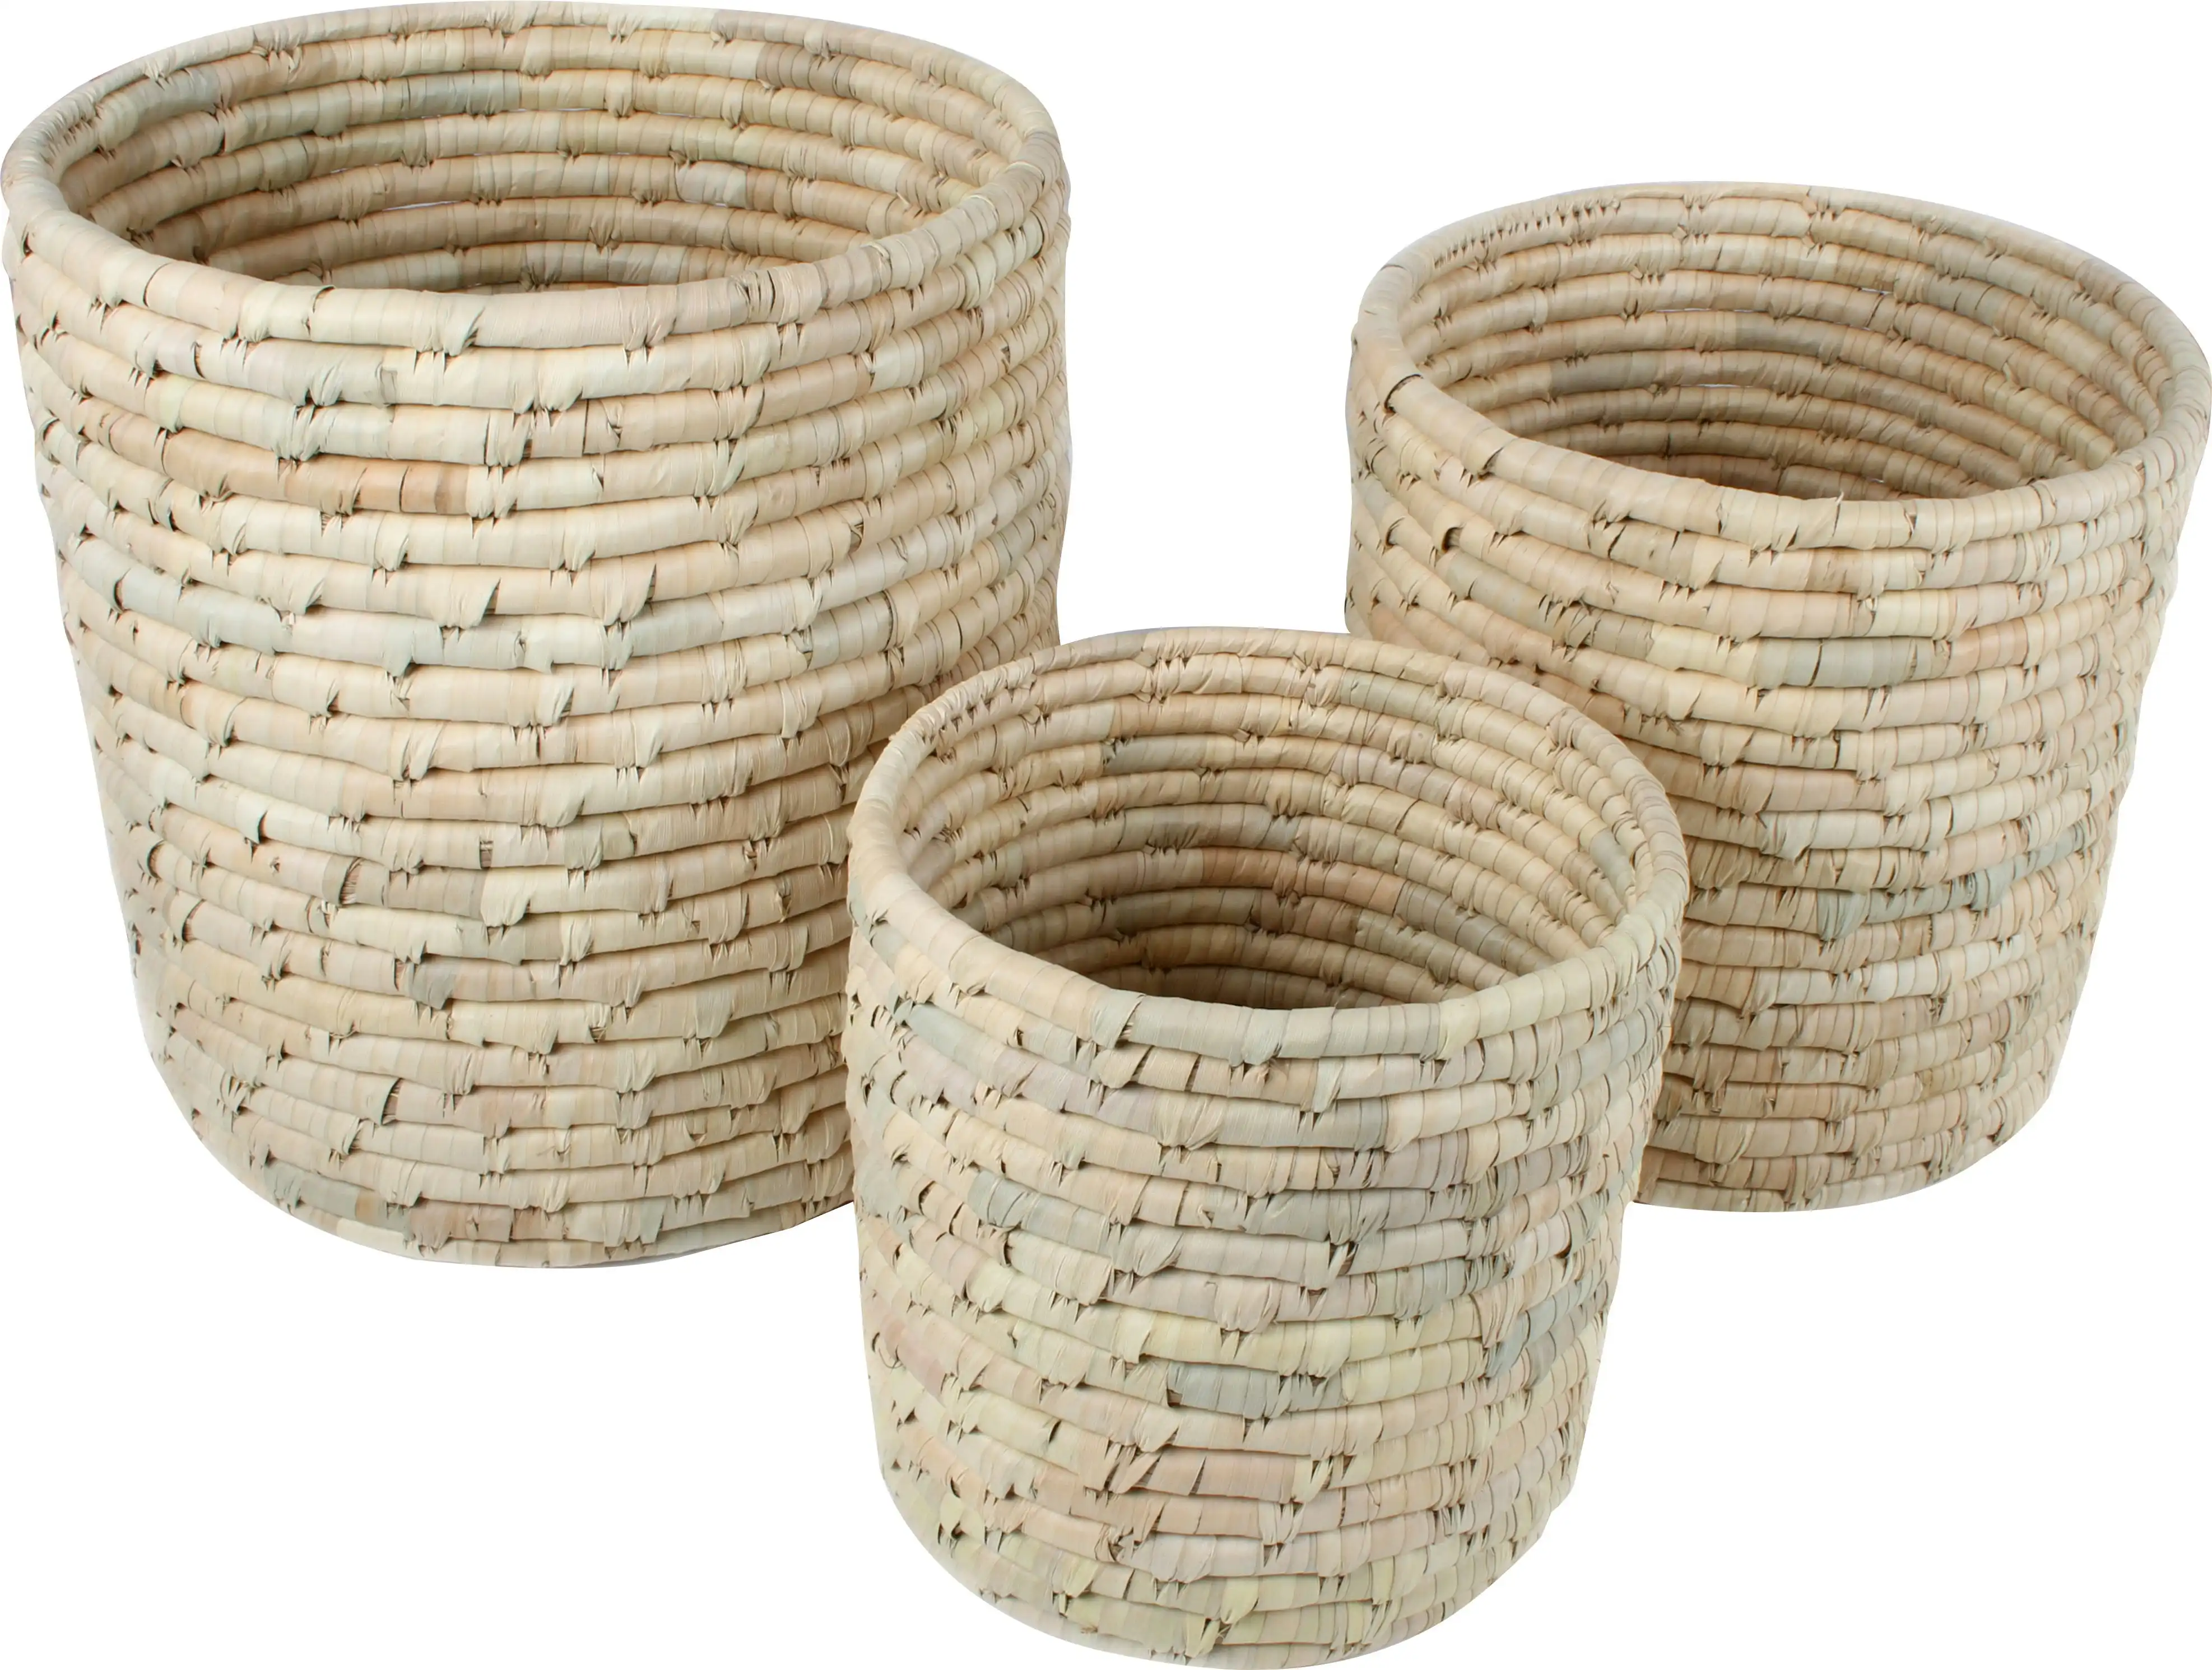 Ekka Seagrass And Date Leaf Round Baskets Set Of 3